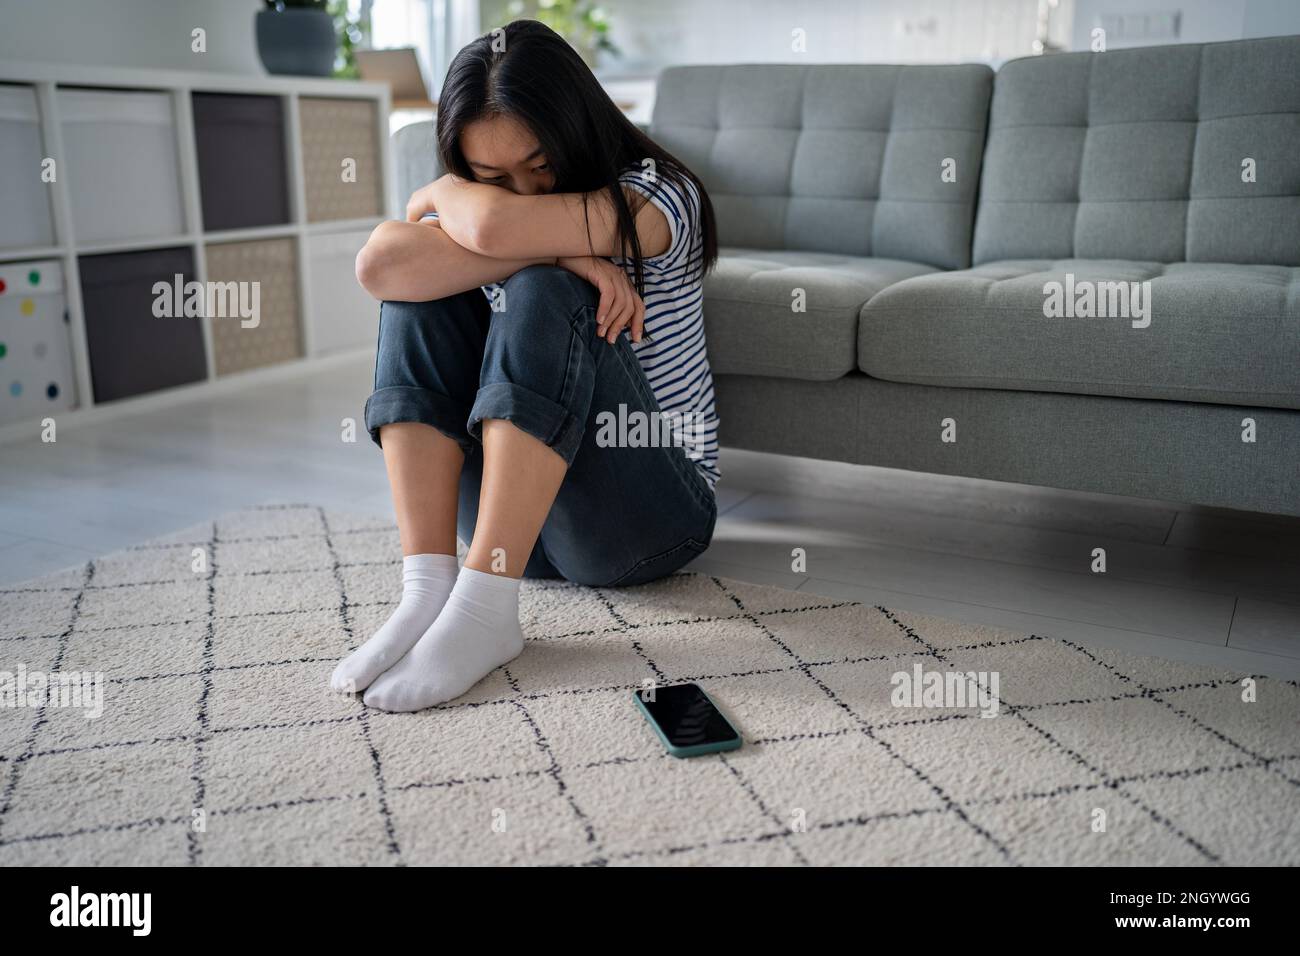 Lonely sad asian woman suffering on floor looks devastated mental trouble bad relationship breakup. Stock Photo